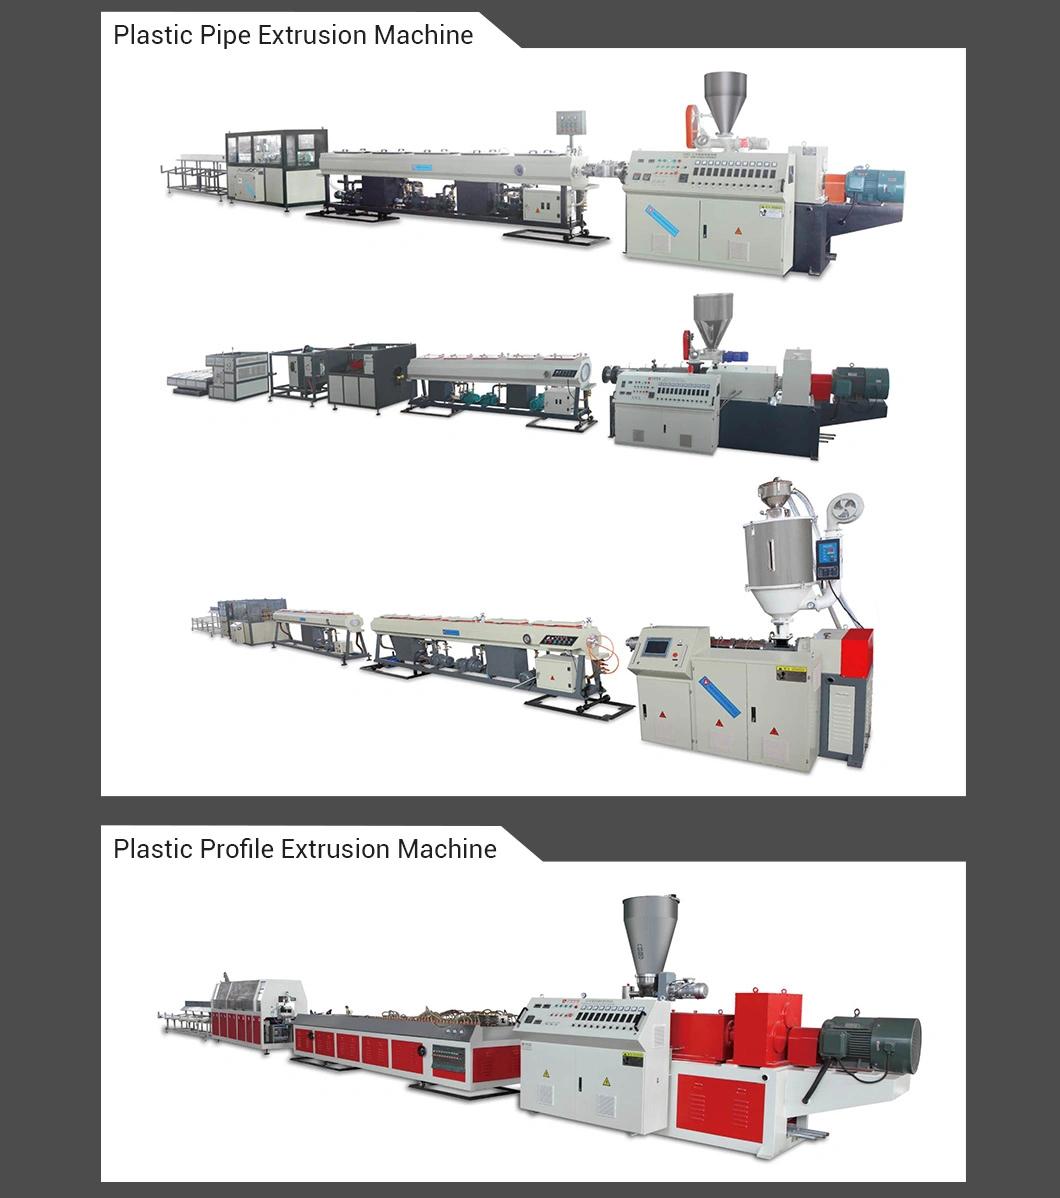 Yatong HDPE PE/PPR Pipe Extrusion Line Plastic Machine